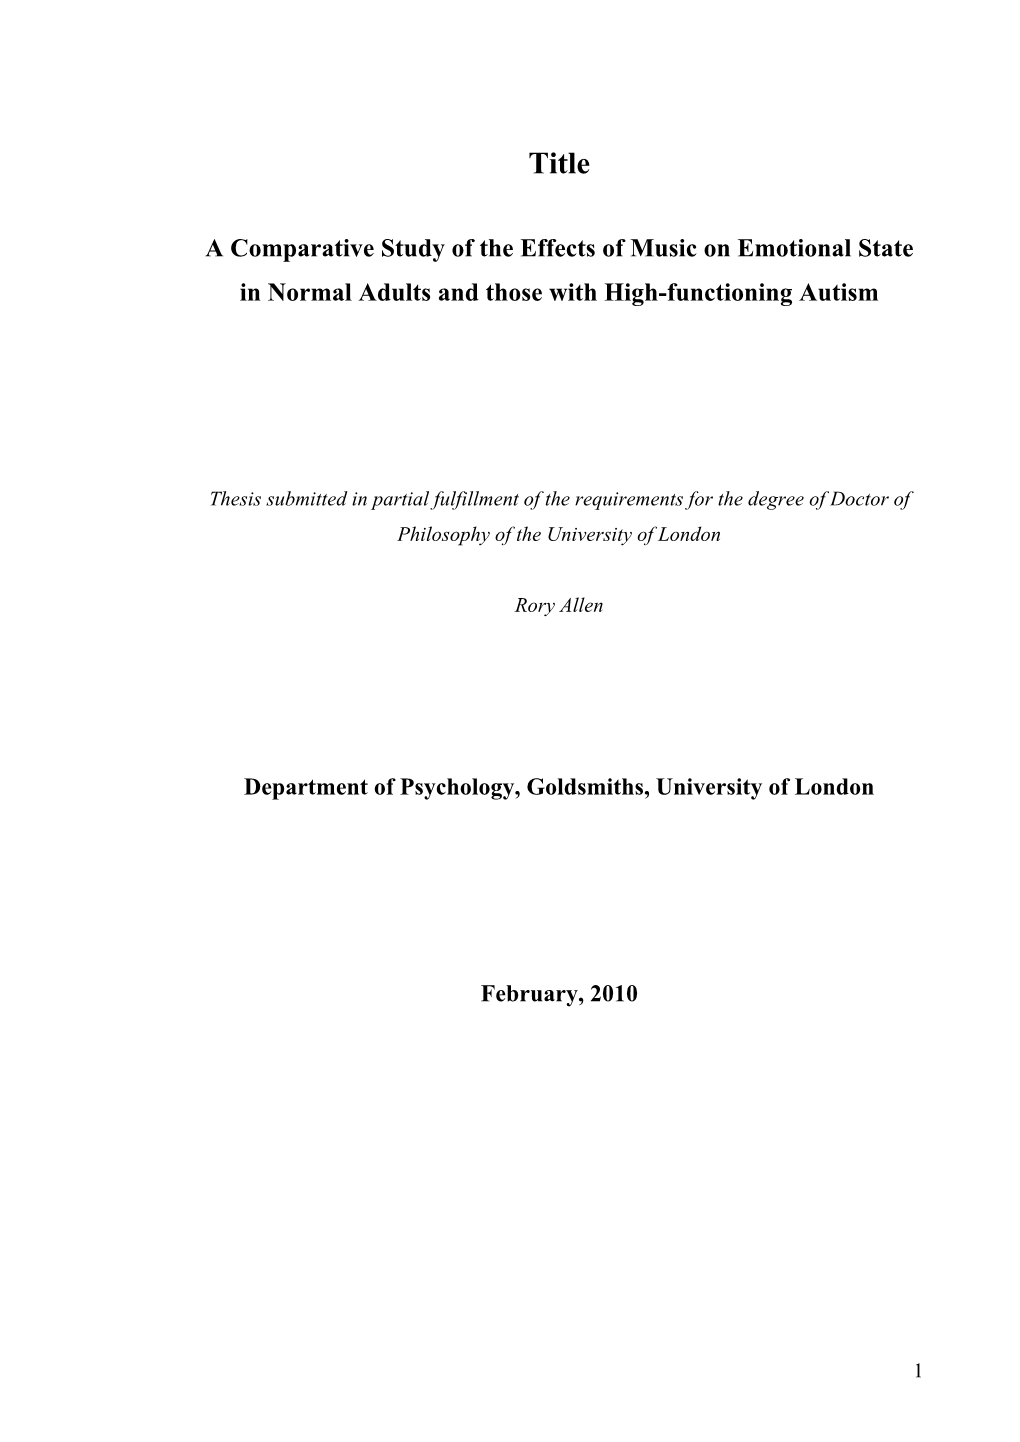 A Comparative Study of the Effects of Music on Emotional State in Normal Adults and Those with High-Functioning Autism